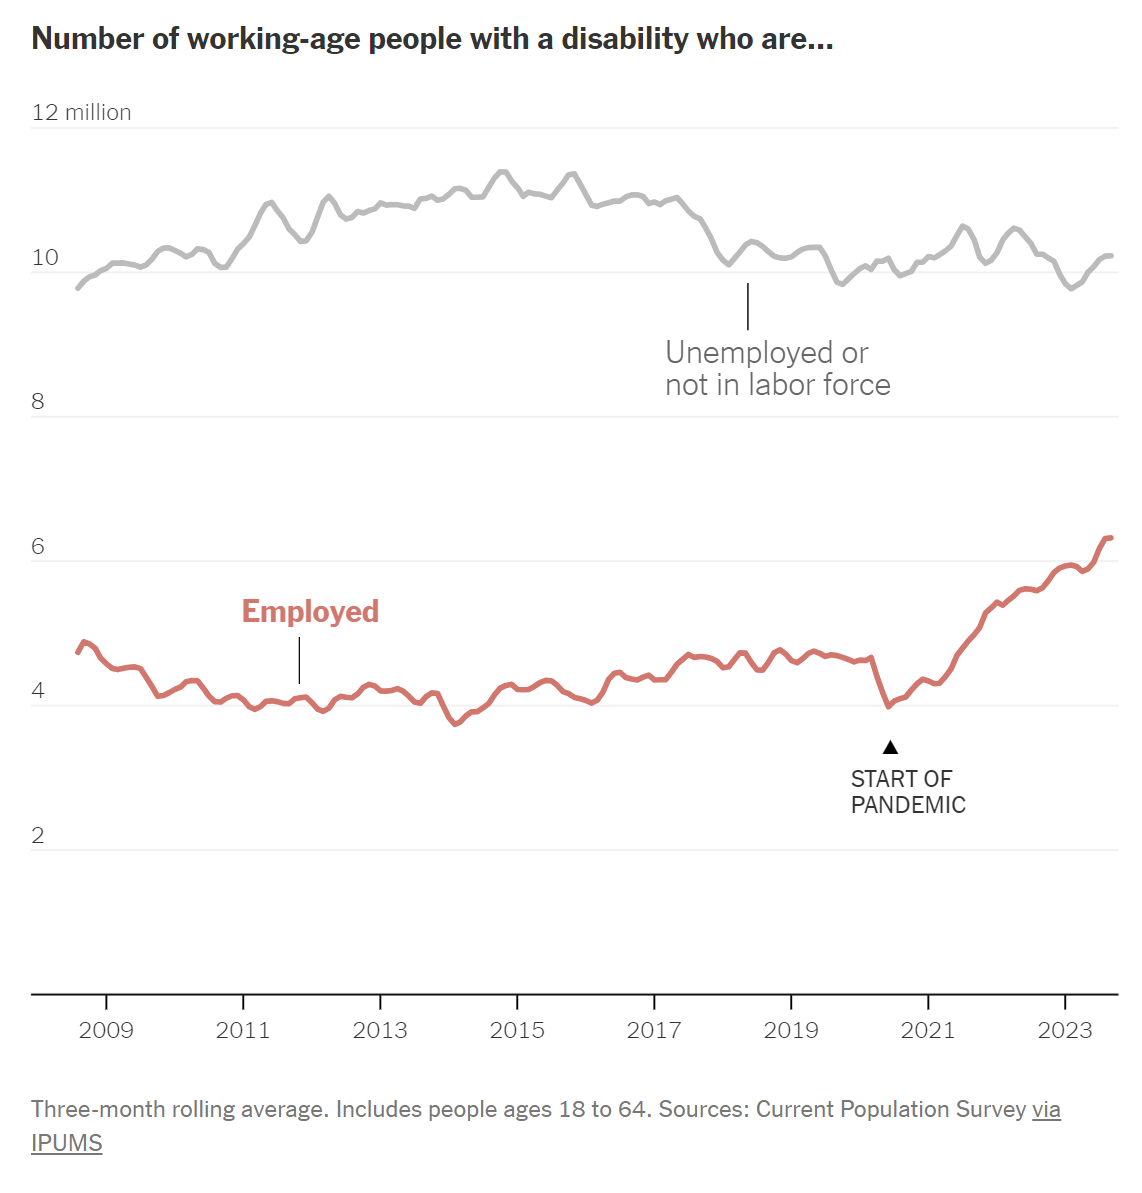 Survey results showing number of working-age people in the U.S. who are employed or unemployed, 2009-2023. Three-month rolling average. Includes people ages 18 to 64. Data: Current Population Survey via IPUMS. Graphic: The New York Times